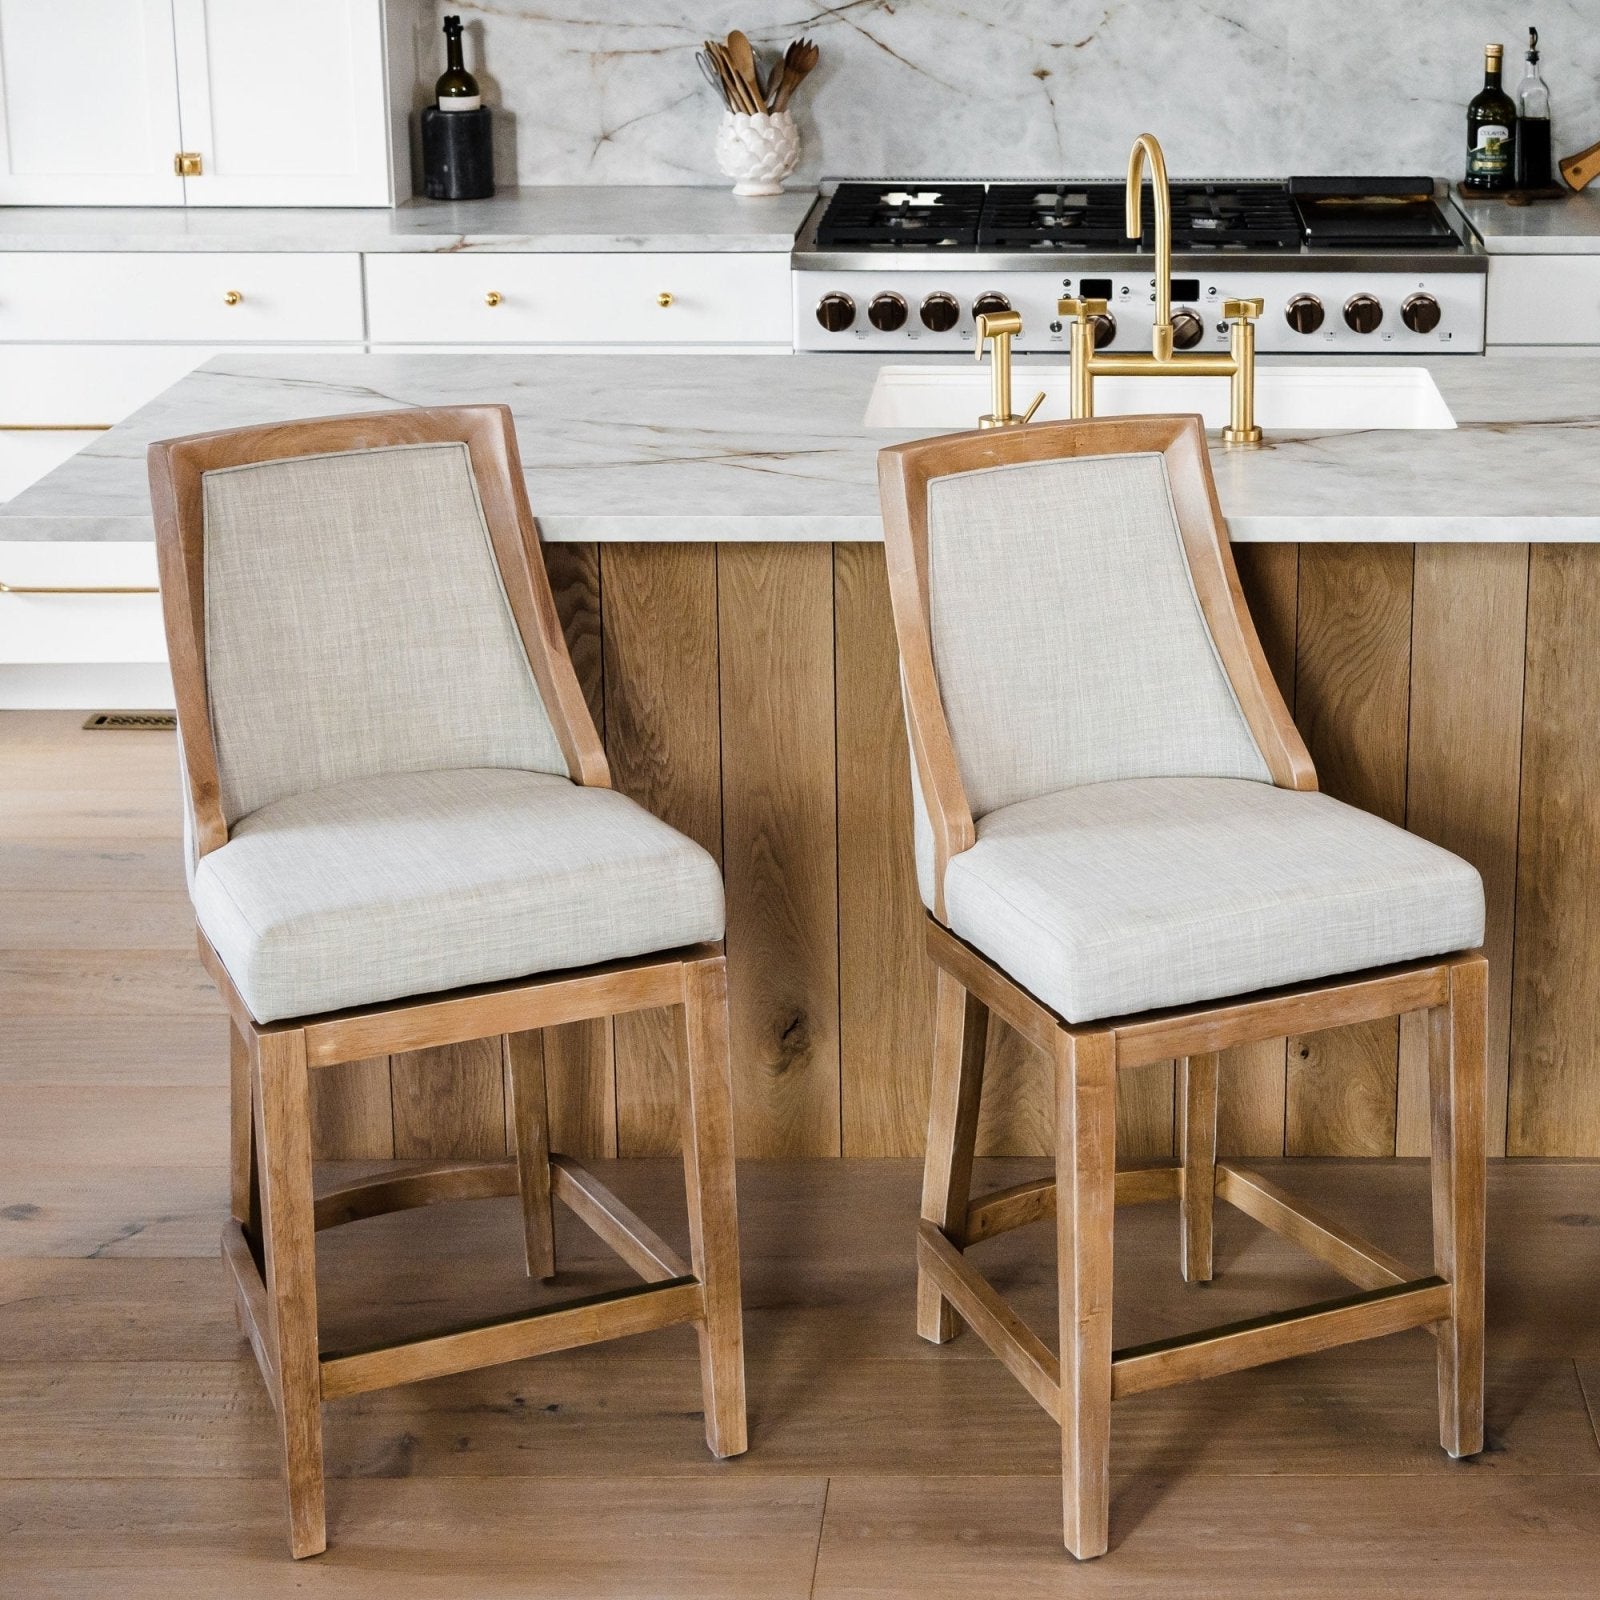 Vienna Counter Stool in Weathered Oak Finish with Sand Color Fabric Upholstery in Stools by Maven Lane